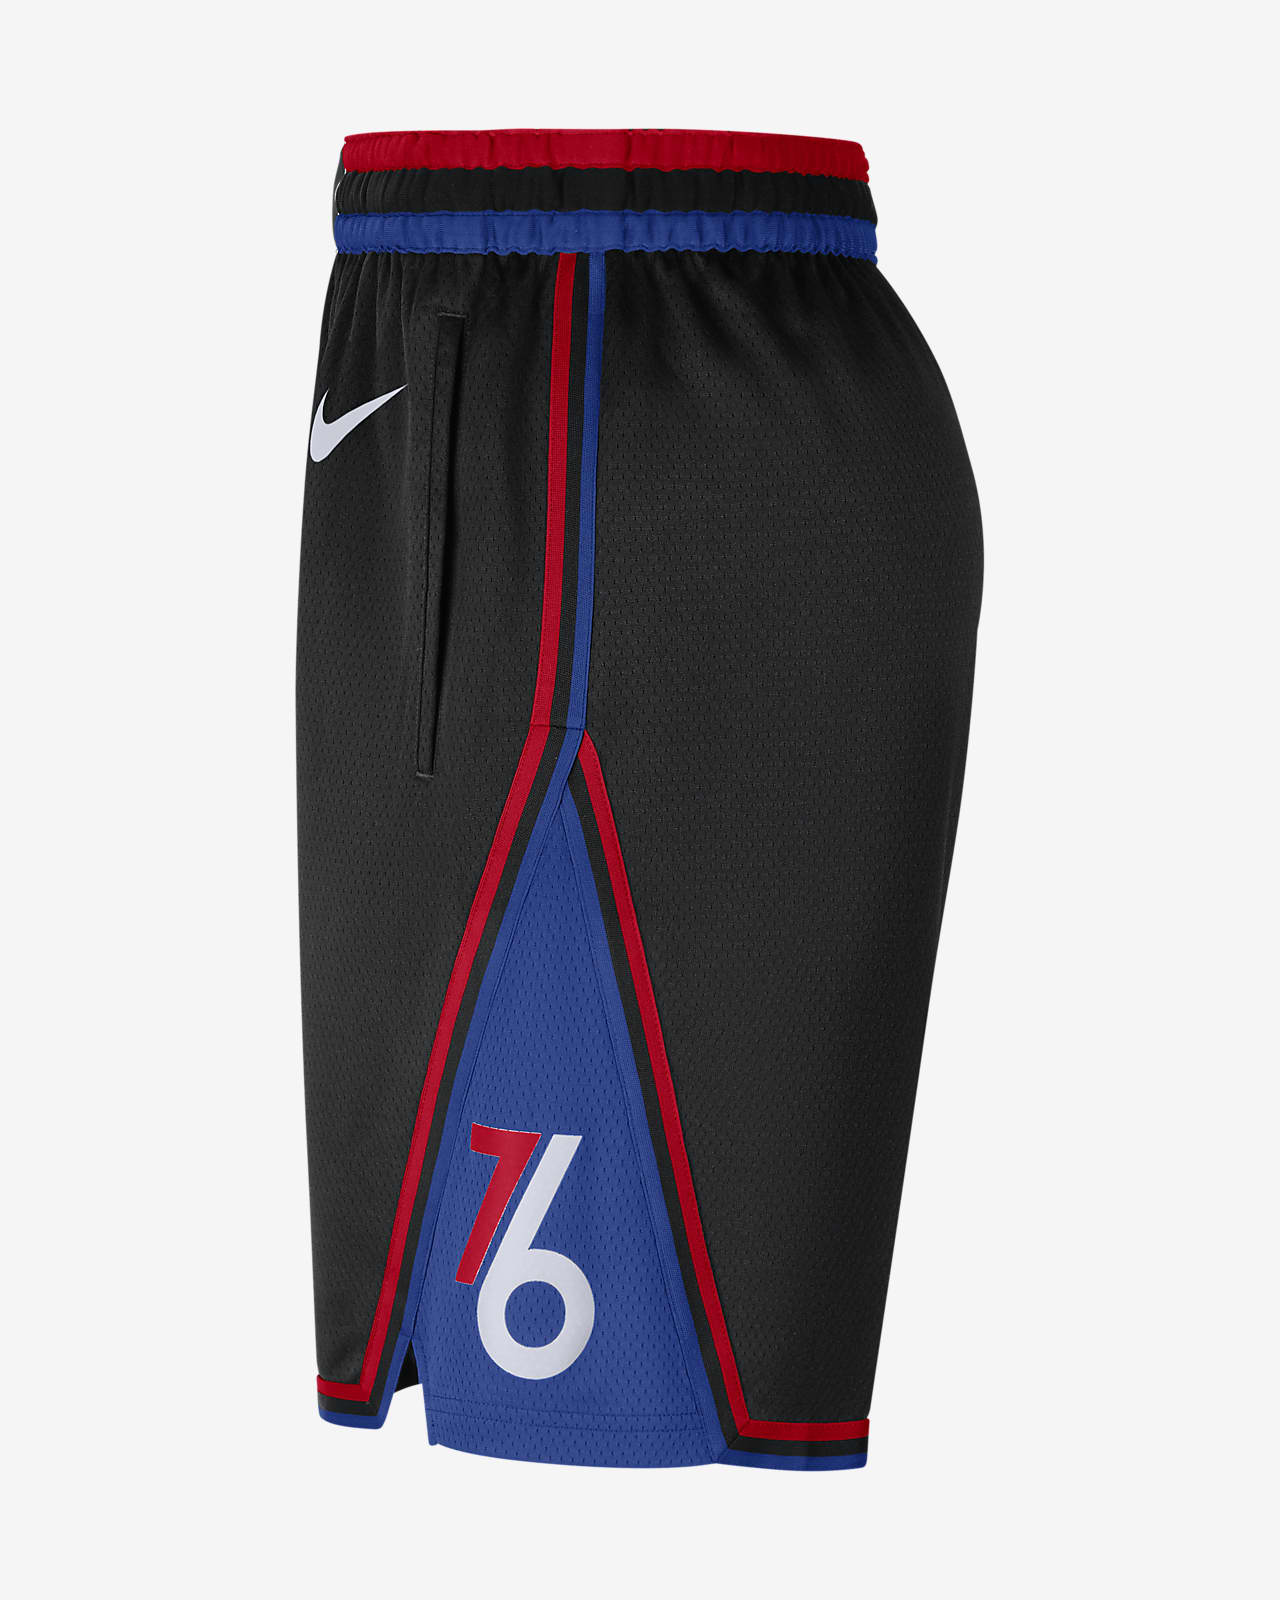 Sixers Shorts : Authentic Champ 76ers Shorts Size 46 Great Condition Dm ...